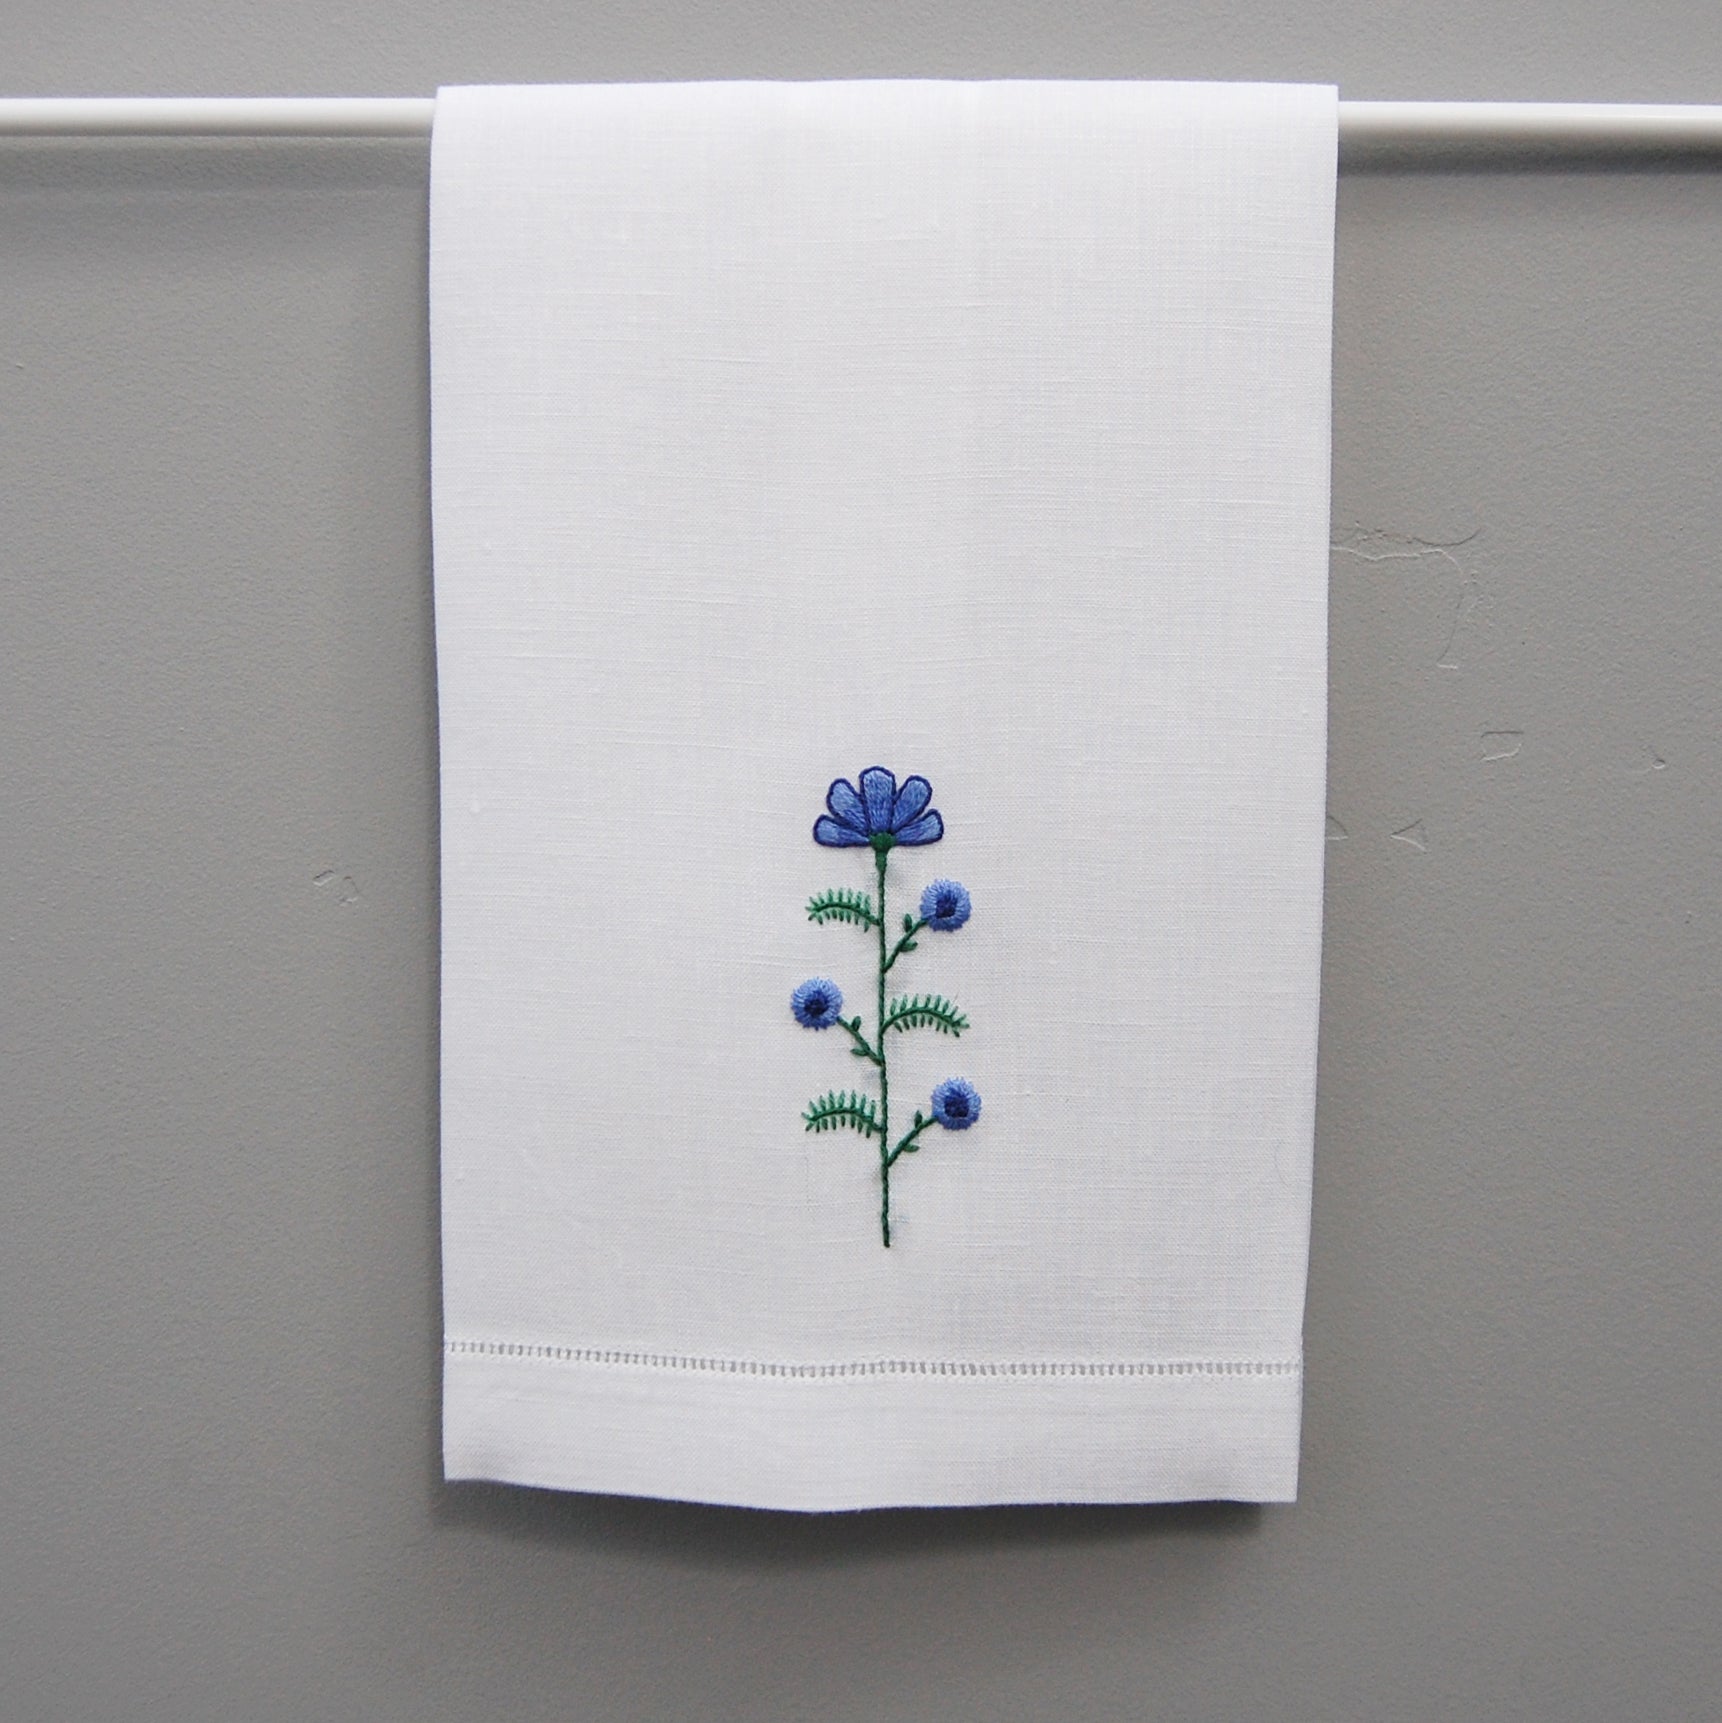 Happy Cactus Designs Hand Embroidered Floral Hand Towel • Image and Design Copyright Happy Cactus Designs LLC